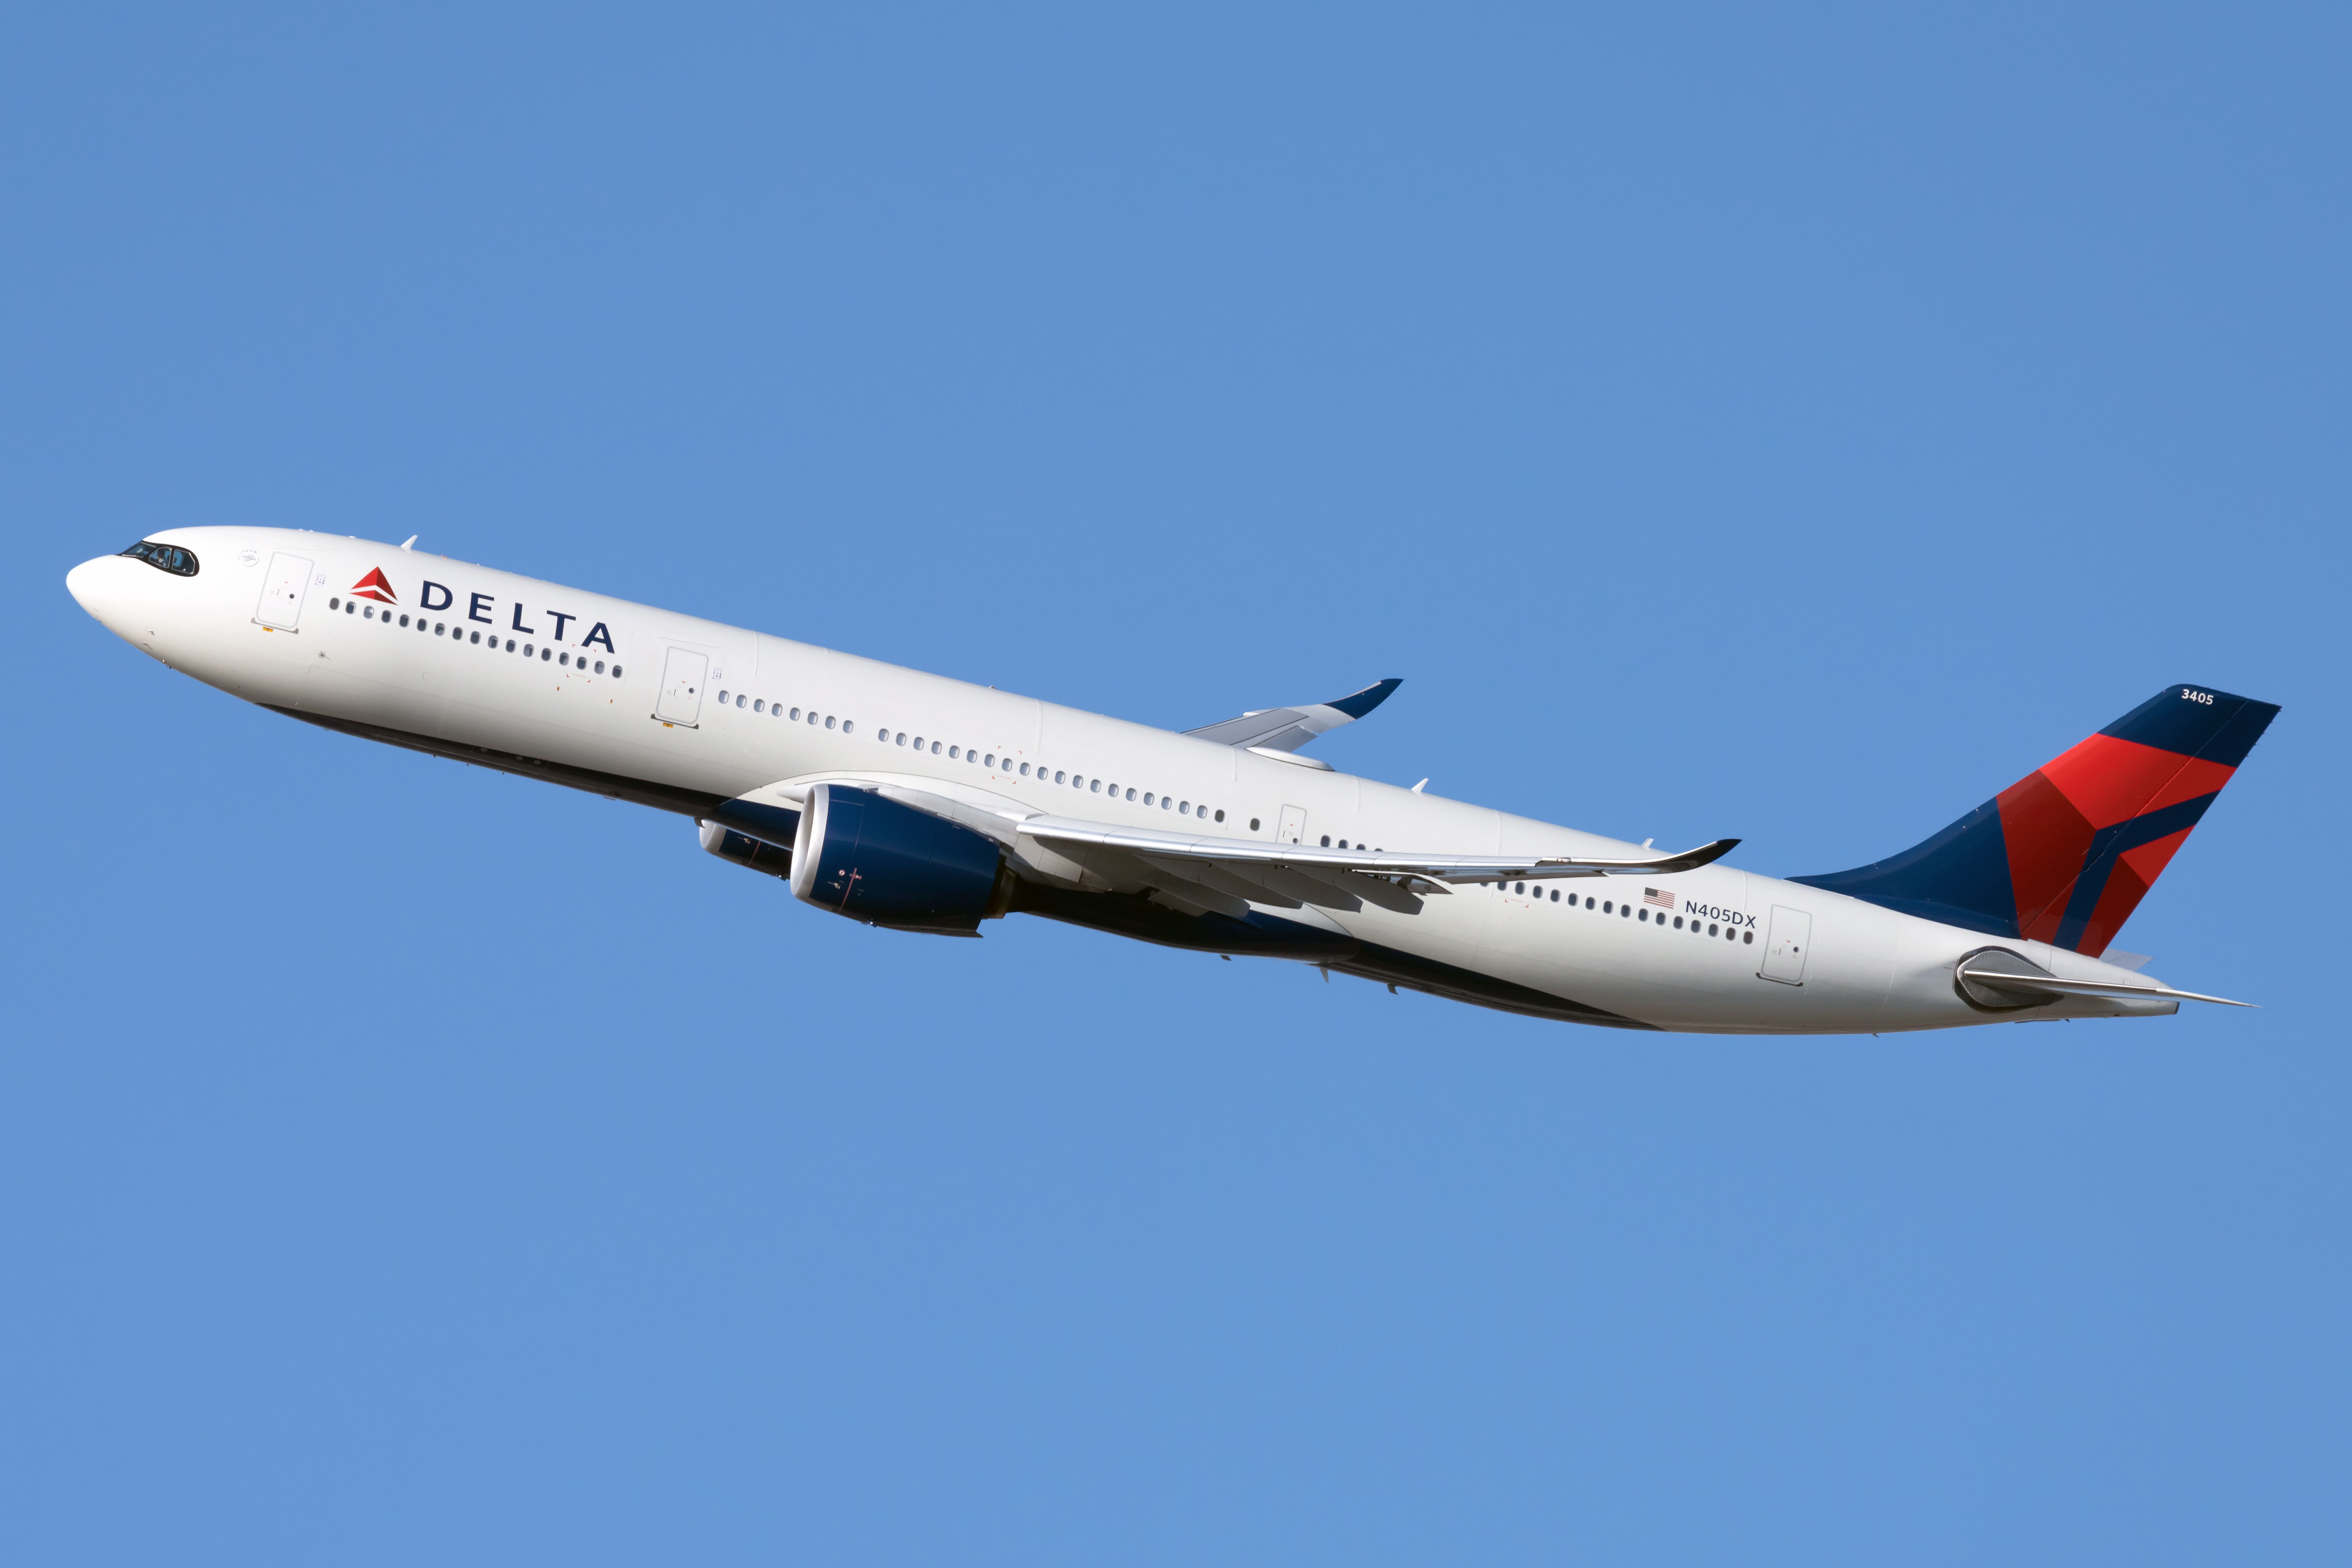 A Delta Air Lines Airbus A330-941 registered as N405DX taking off from JFK